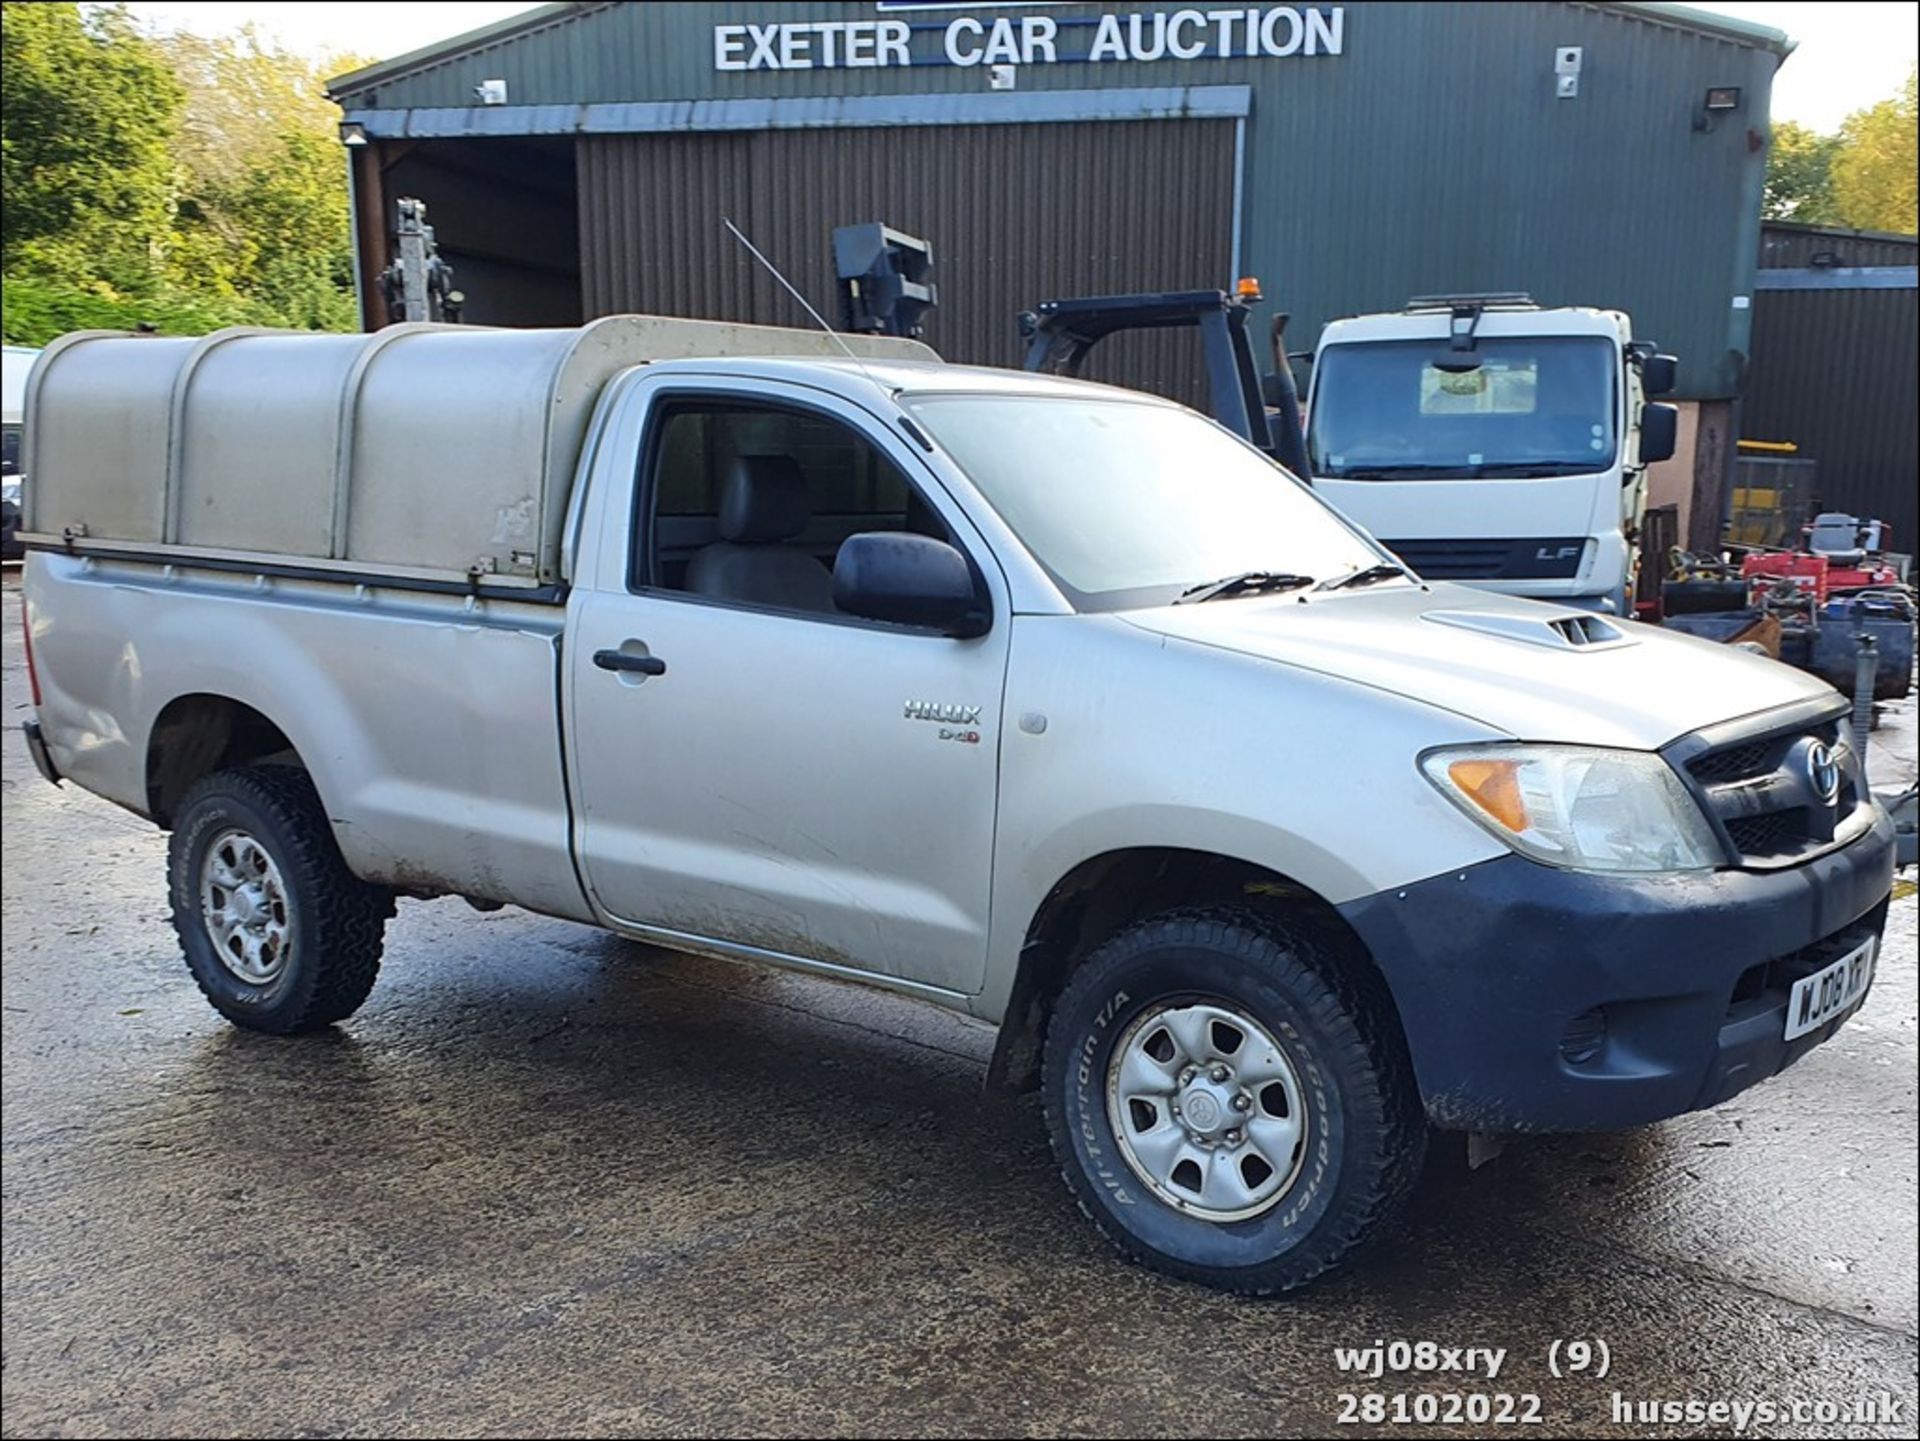 08/08 TOYOTA HILUX HL2 D-4D 4X4 S/C - 2494cc 2dr 4x4 (Silver, 78k) - Image 17 of 32